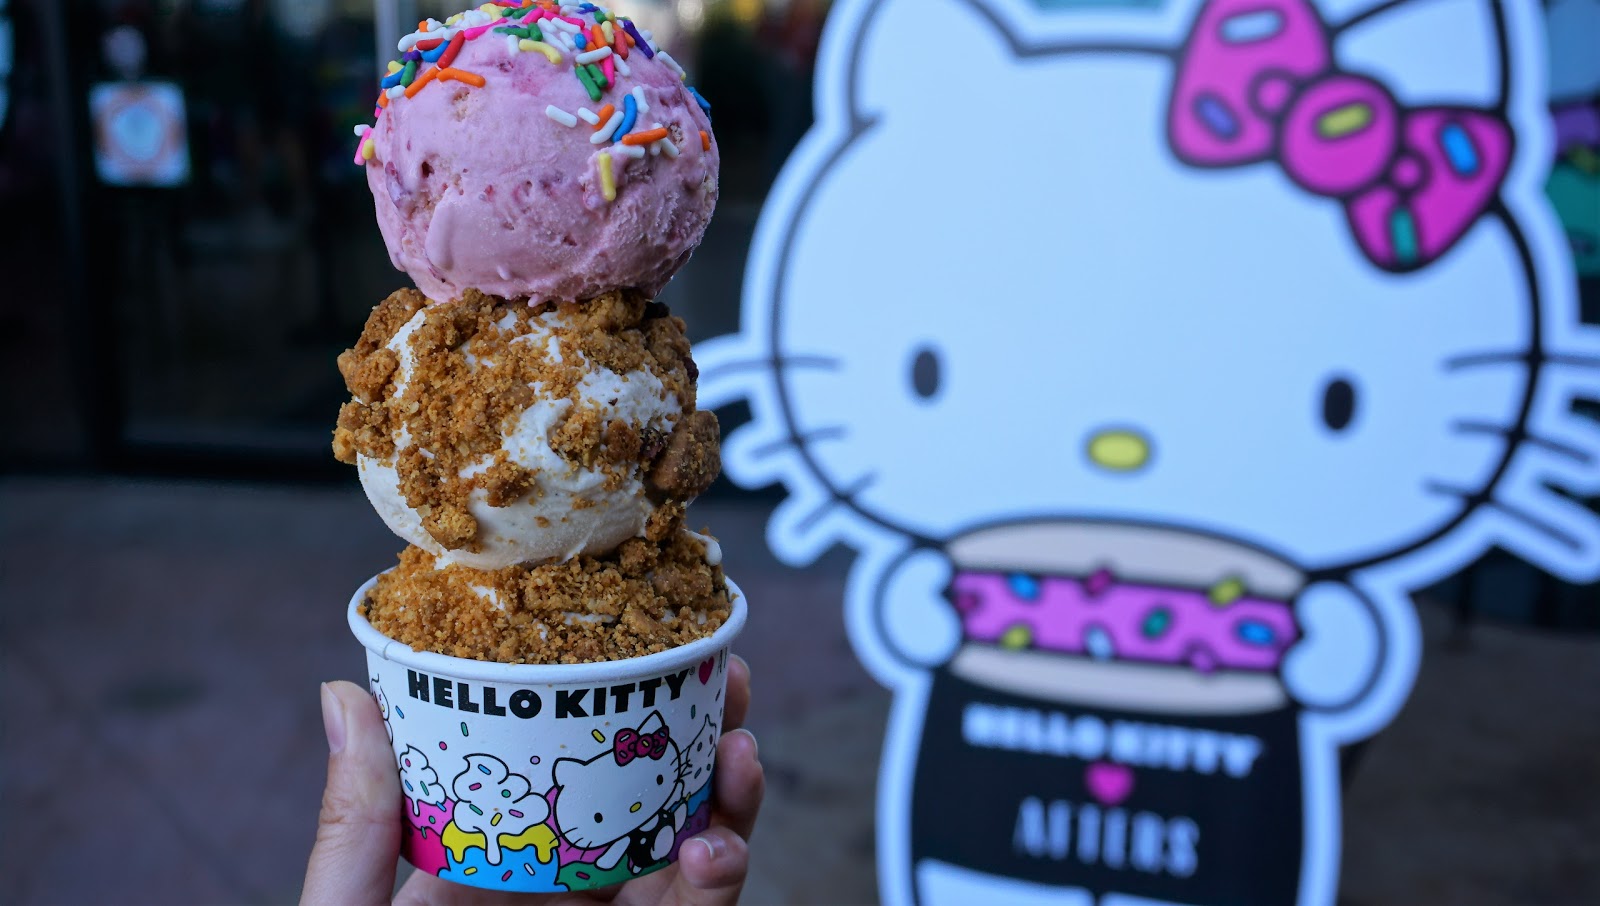 5 Fun Reasons You Should Definitely Go to the Hello Kitty Cafe